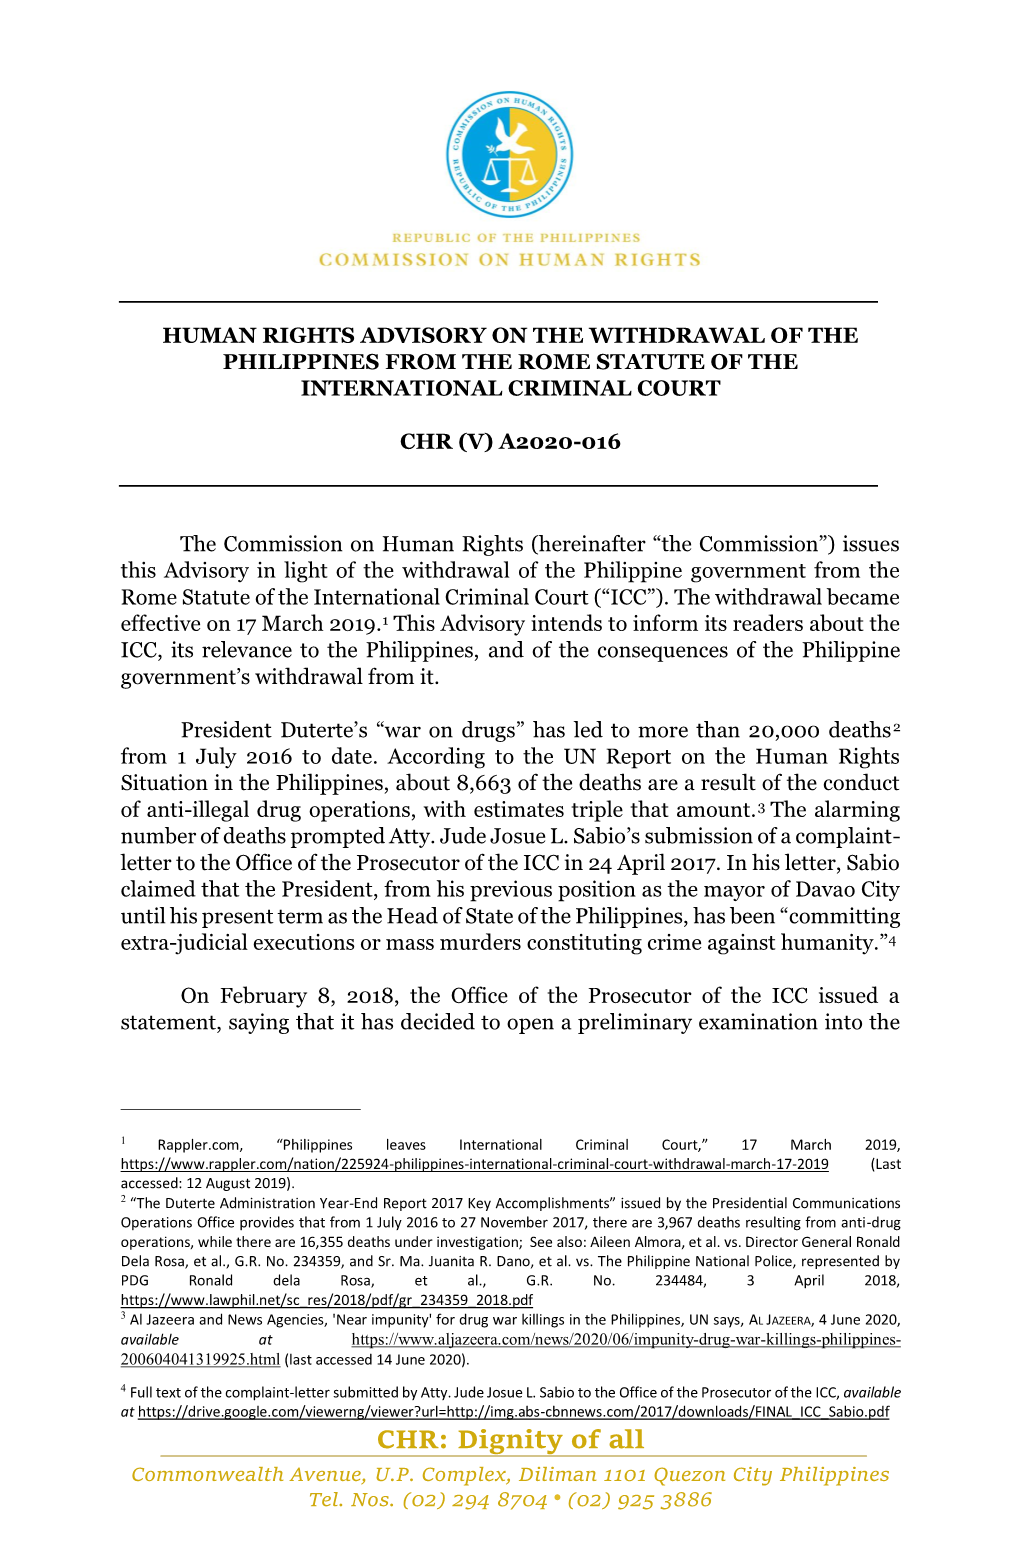 Withdrawal of the Philippines from the Rome Statute of the International Criminal Court